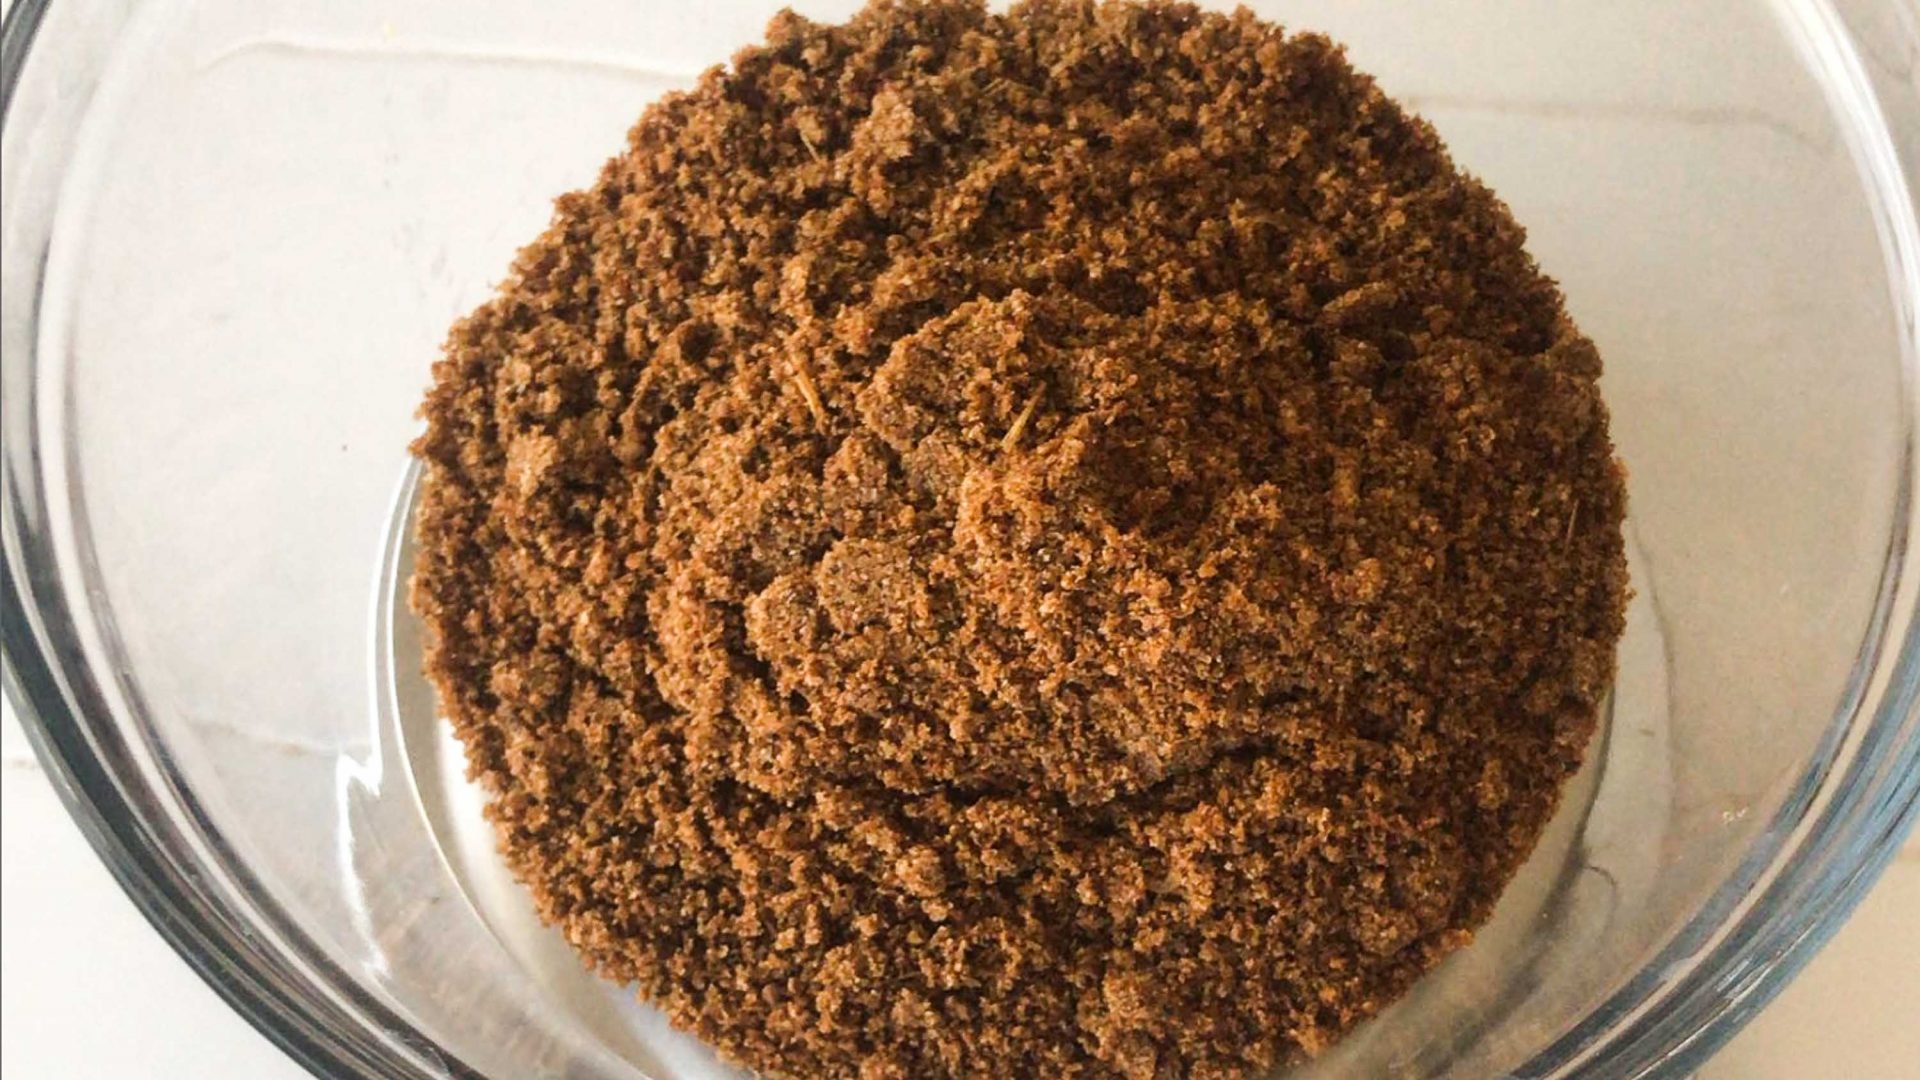 Mealworm powder made from ground mealworms.